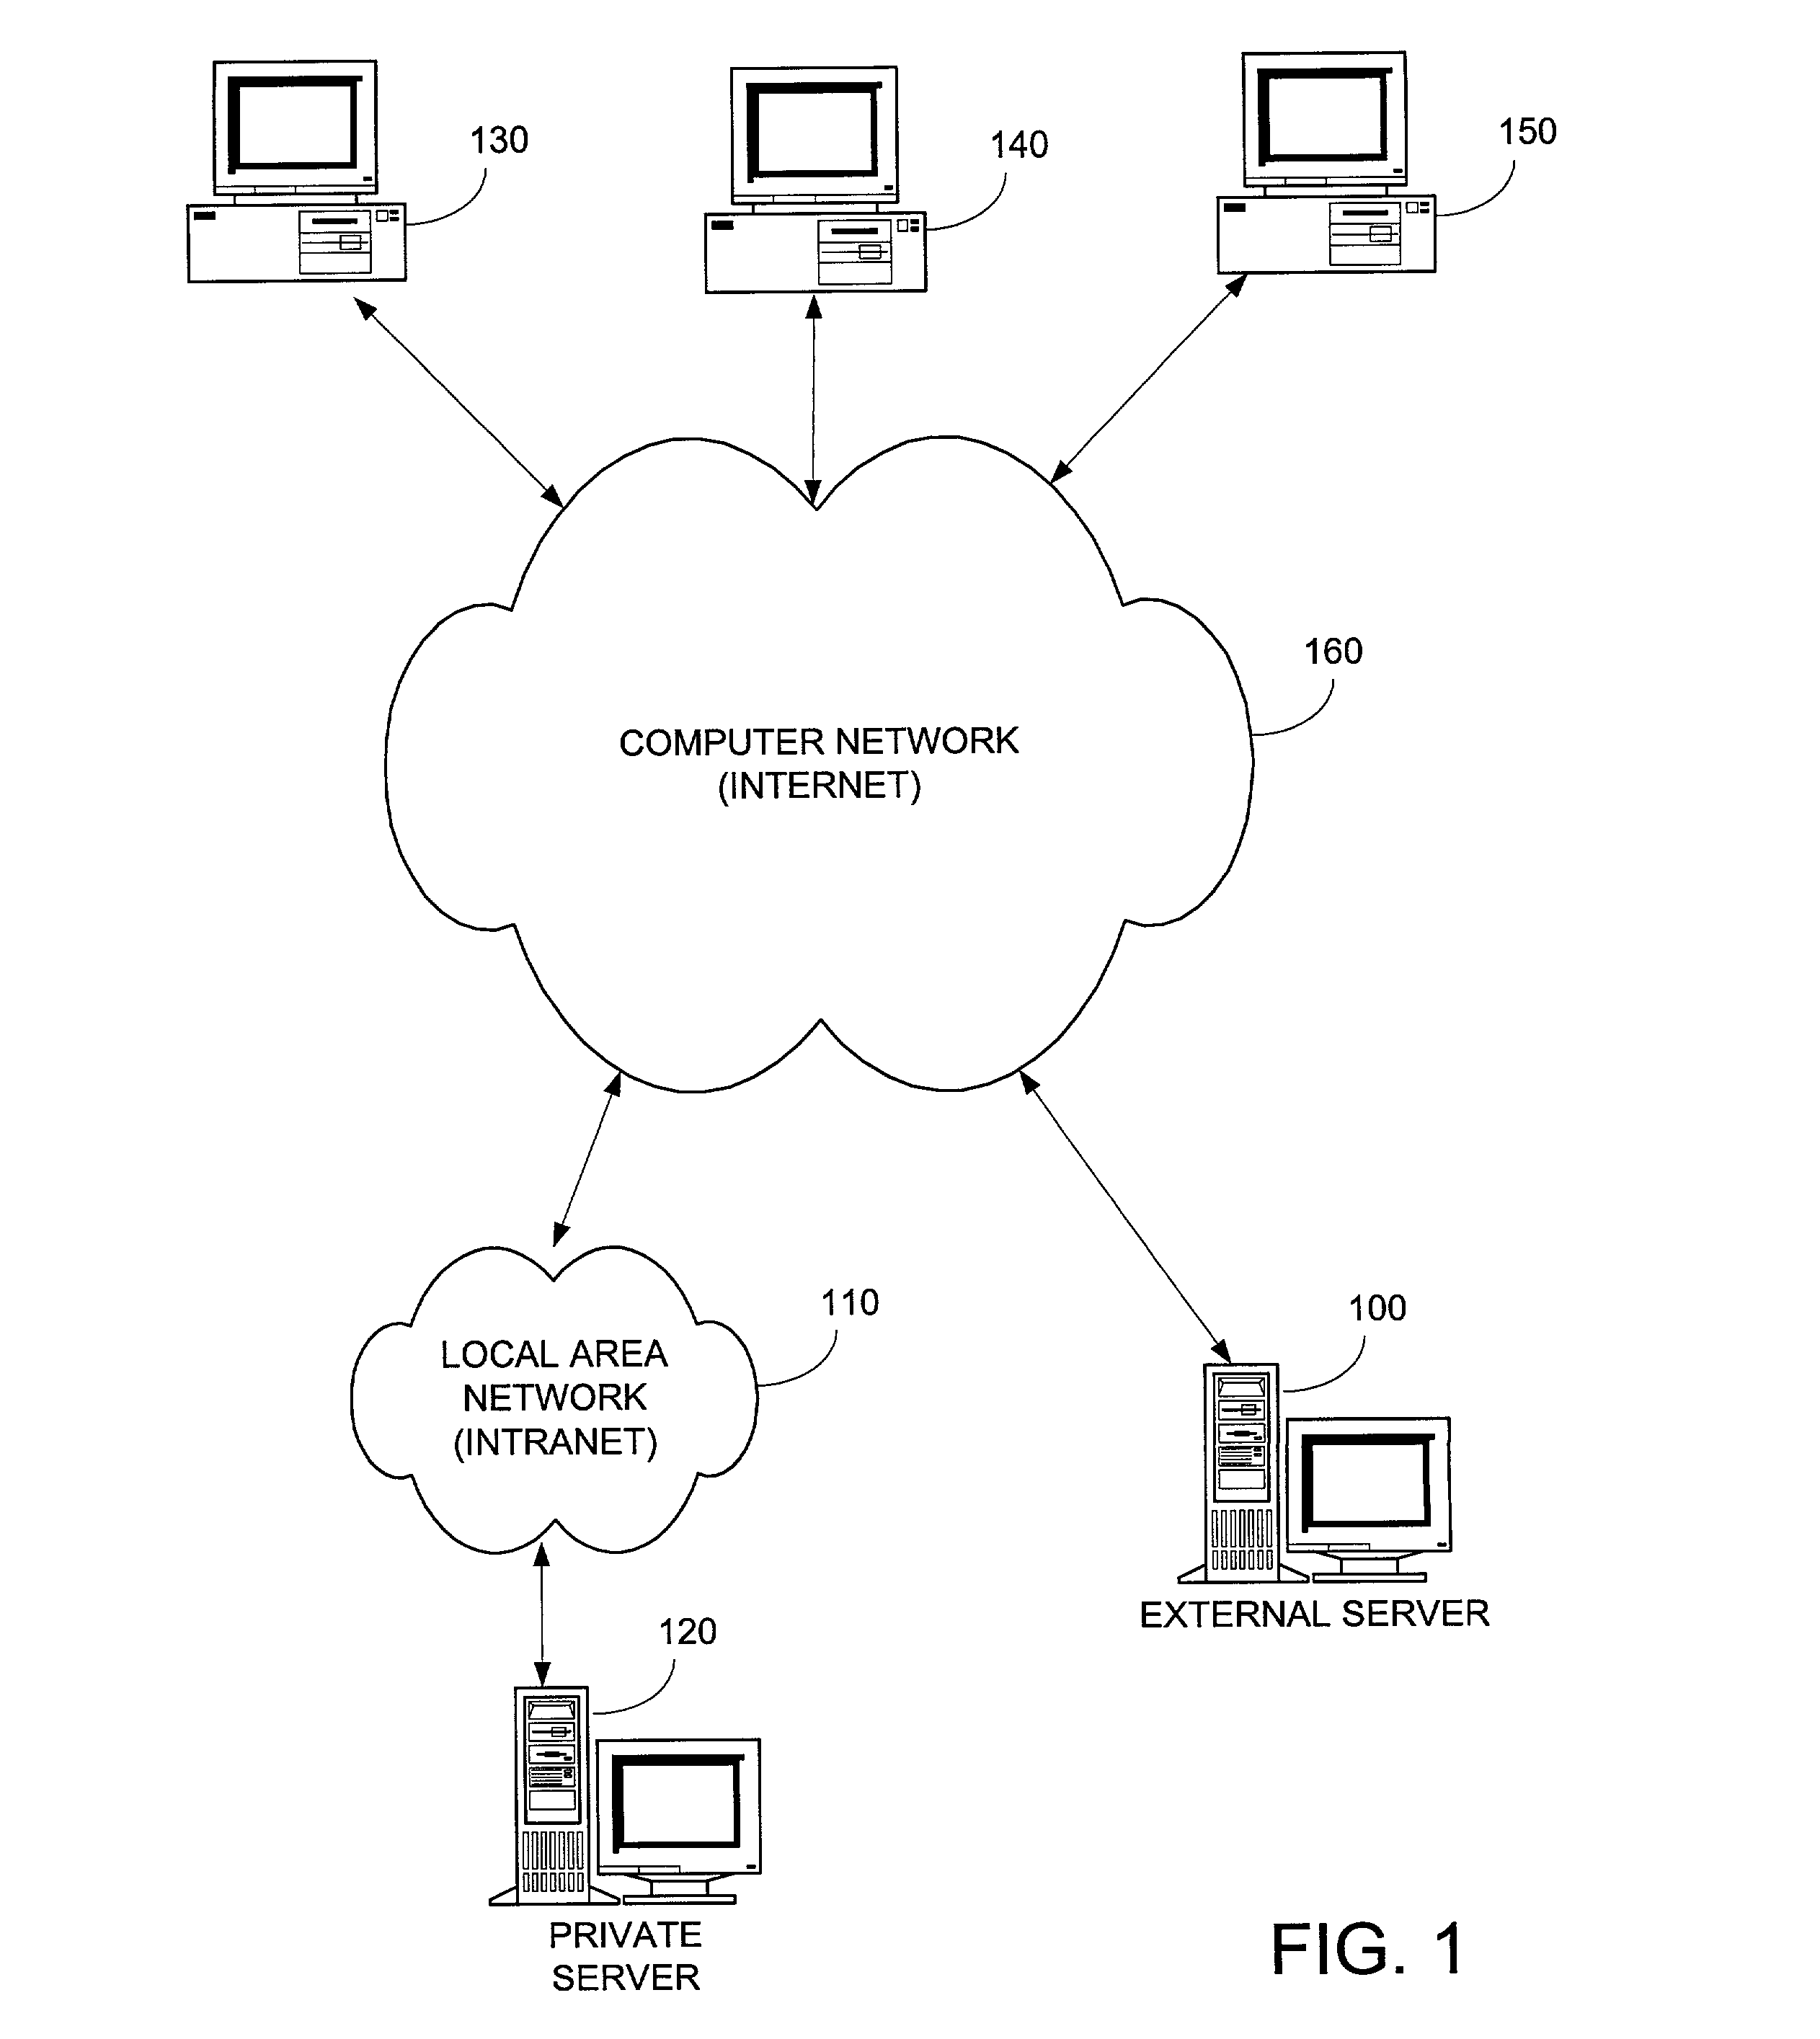 Methods for pre-authentication of users using one-time passwords